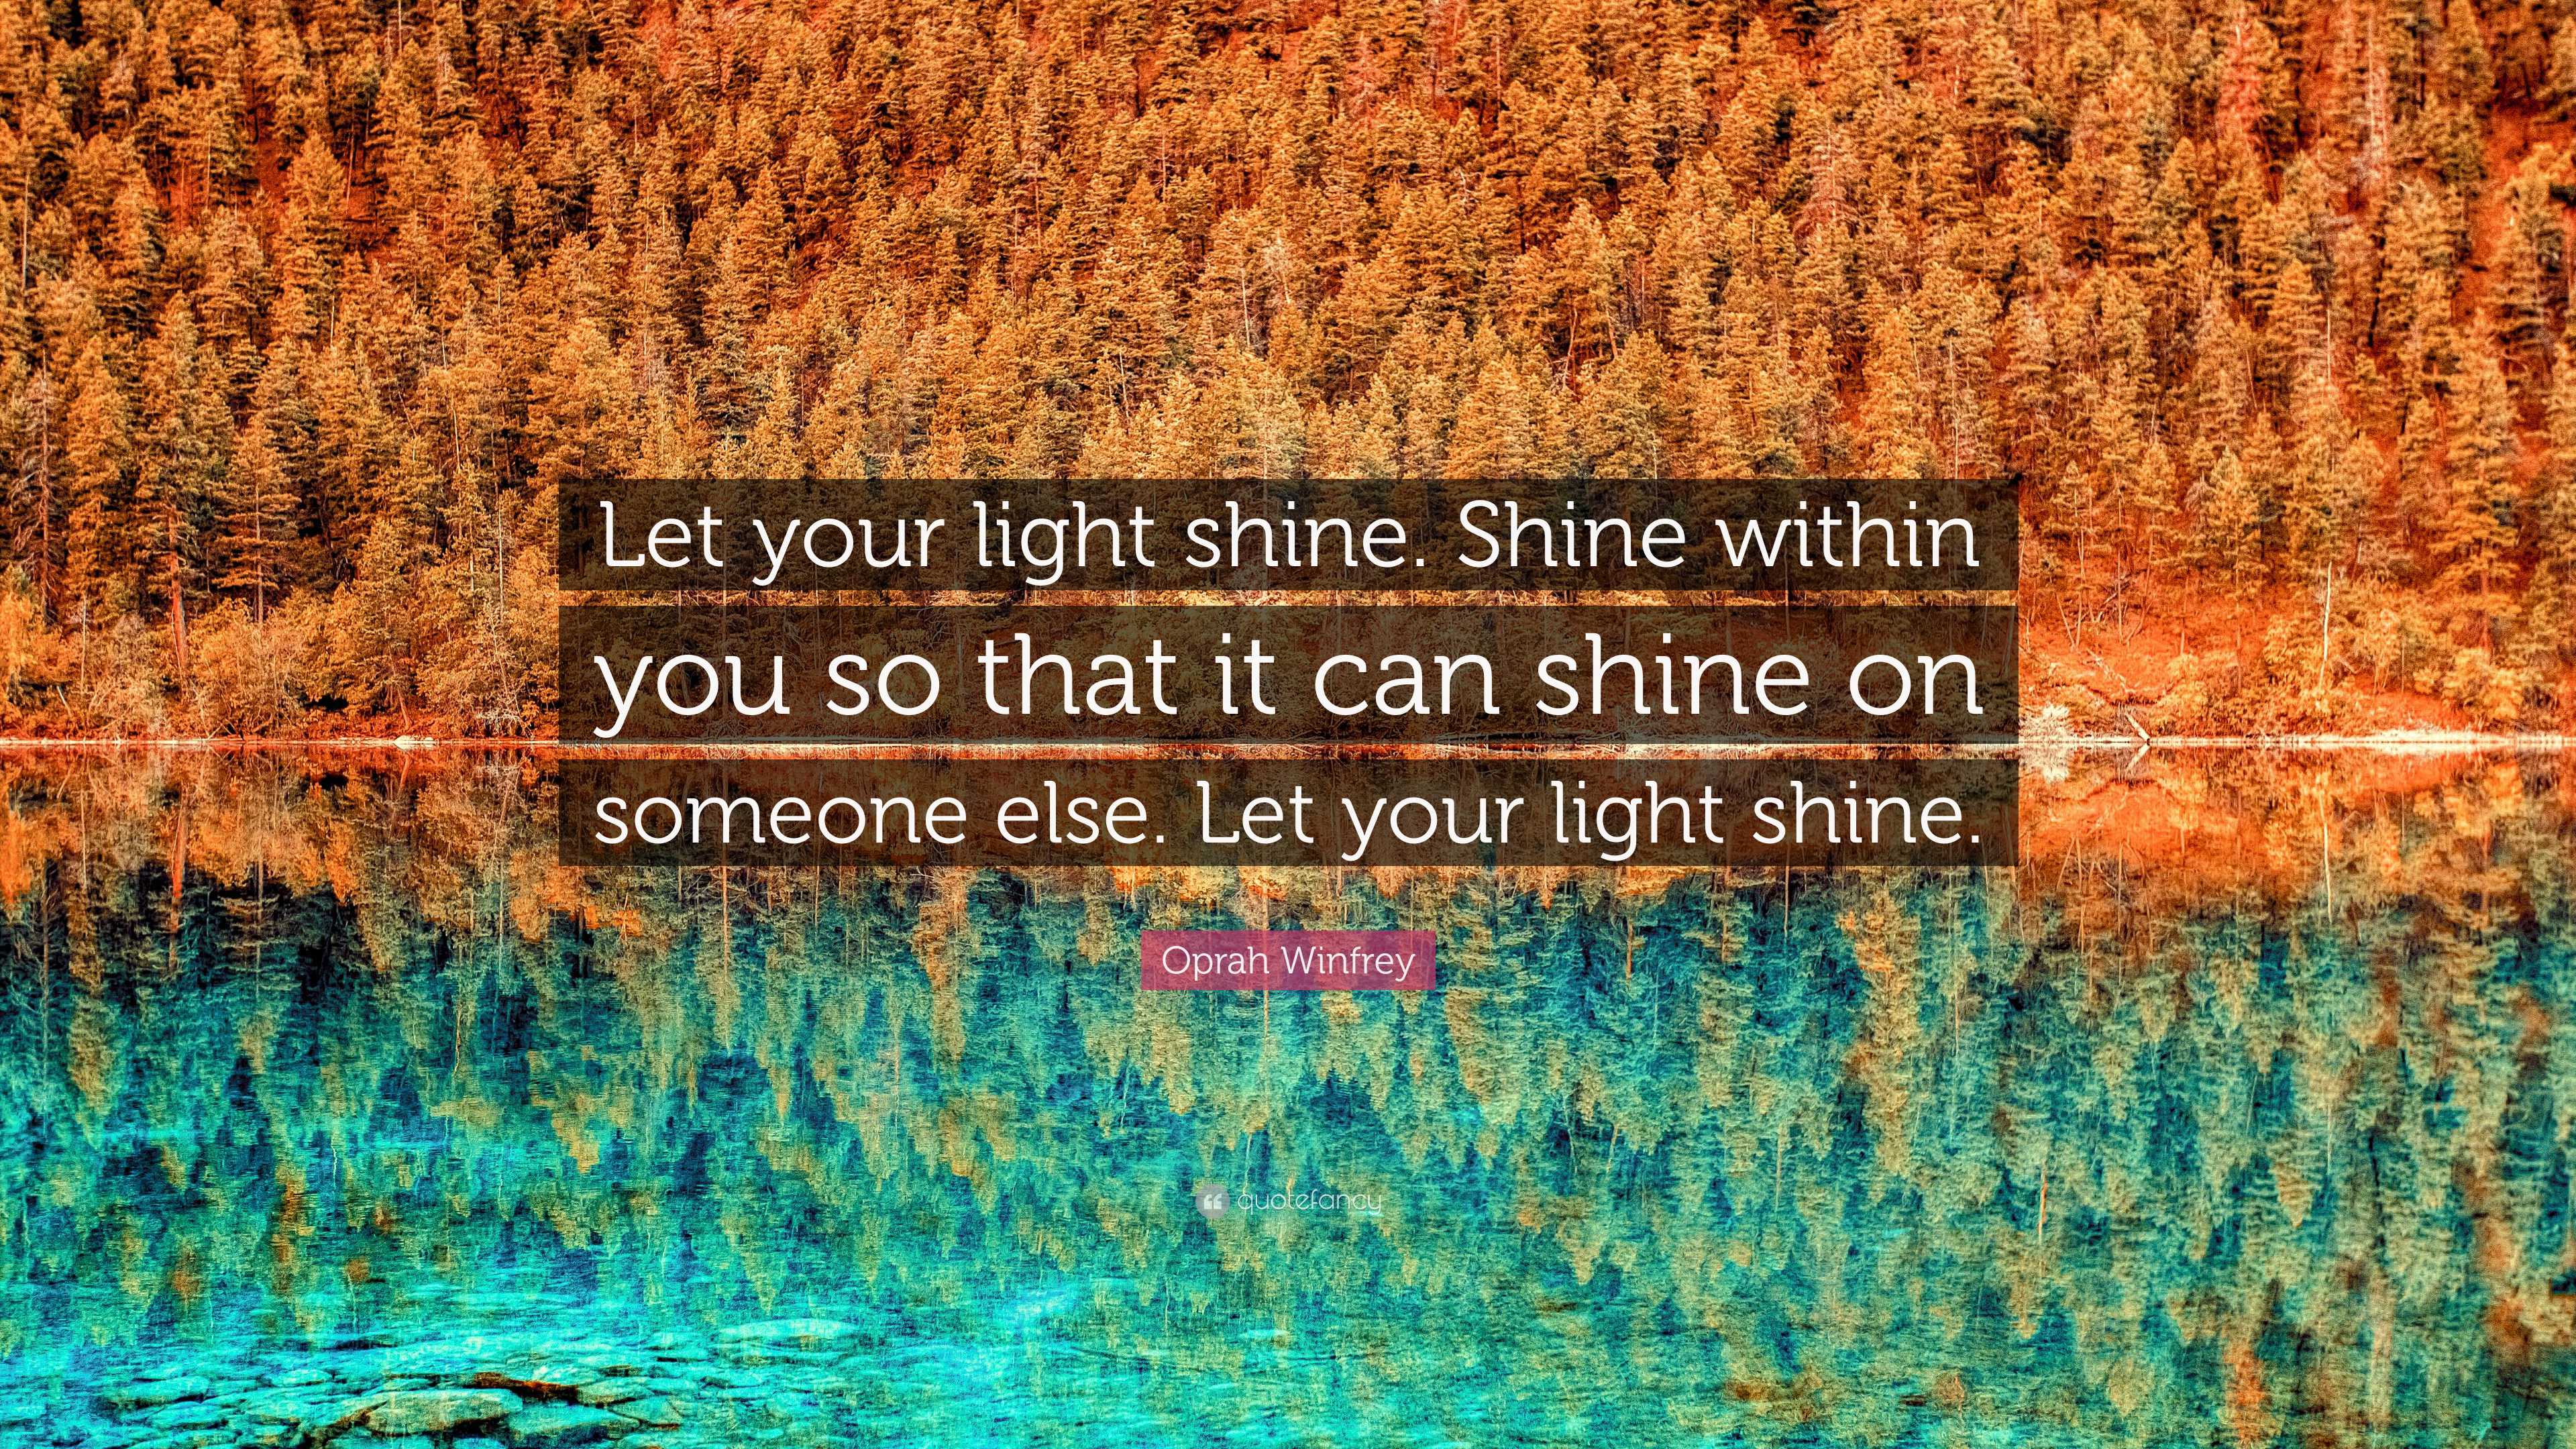 Oprah Winfrey Quote: “Let your light shine. Shine within you so